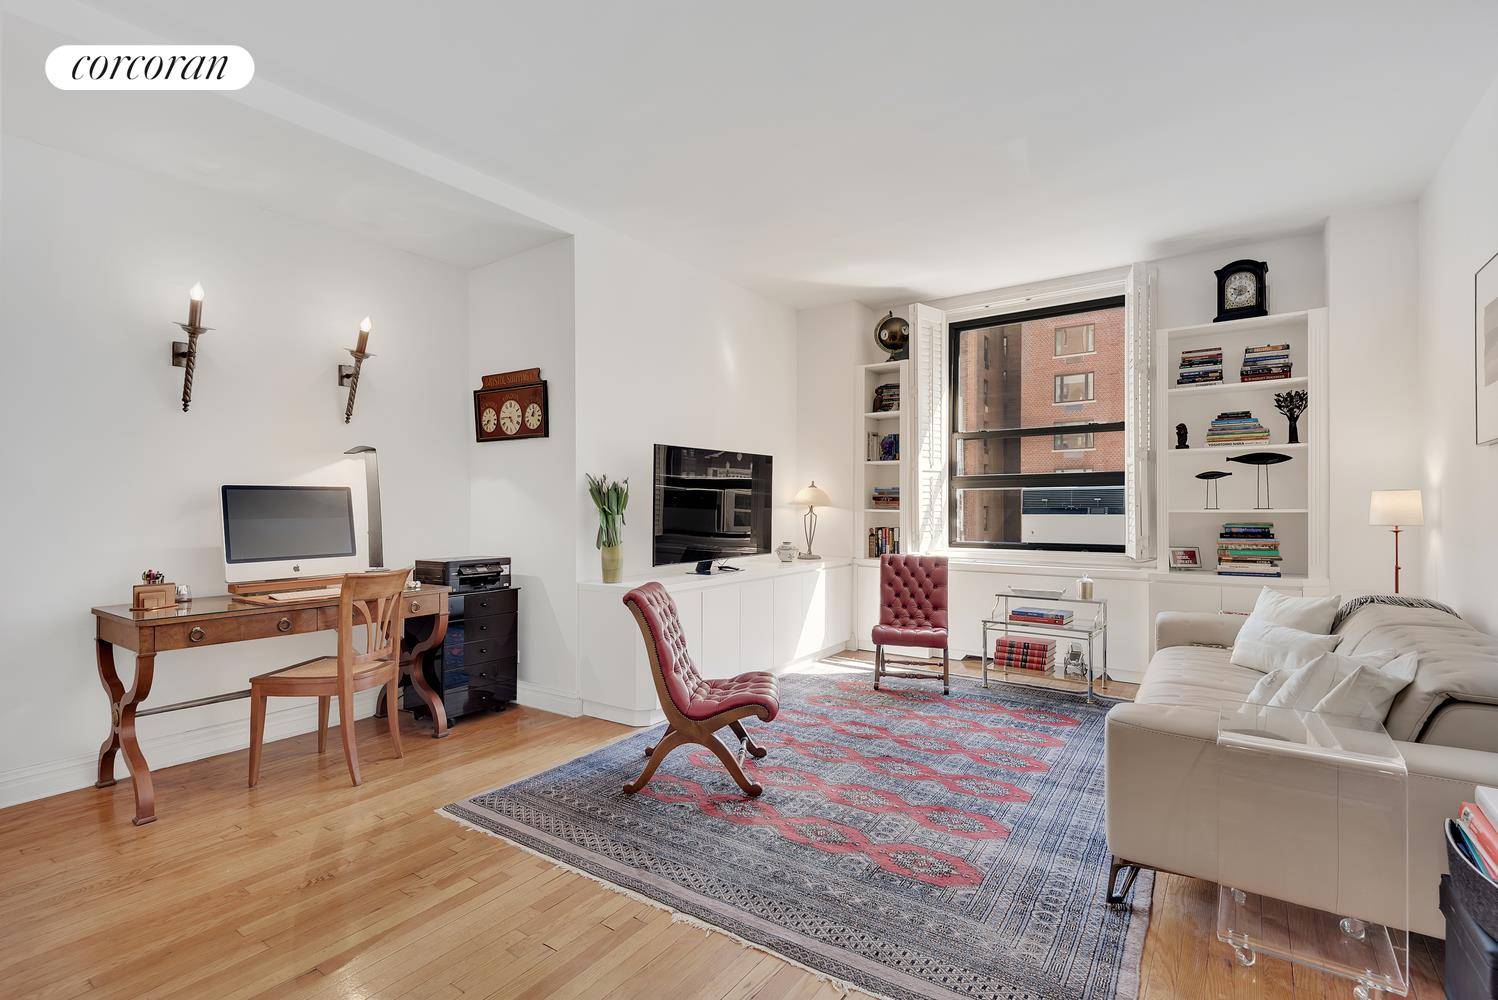 Apartment 5H at 1040 Park Avenue is a lovely, sun filled one bedroom, one bathroom home with oversized windows, hardwood floors, generous storage, very spacious rooms, a beautifully renovated full ...